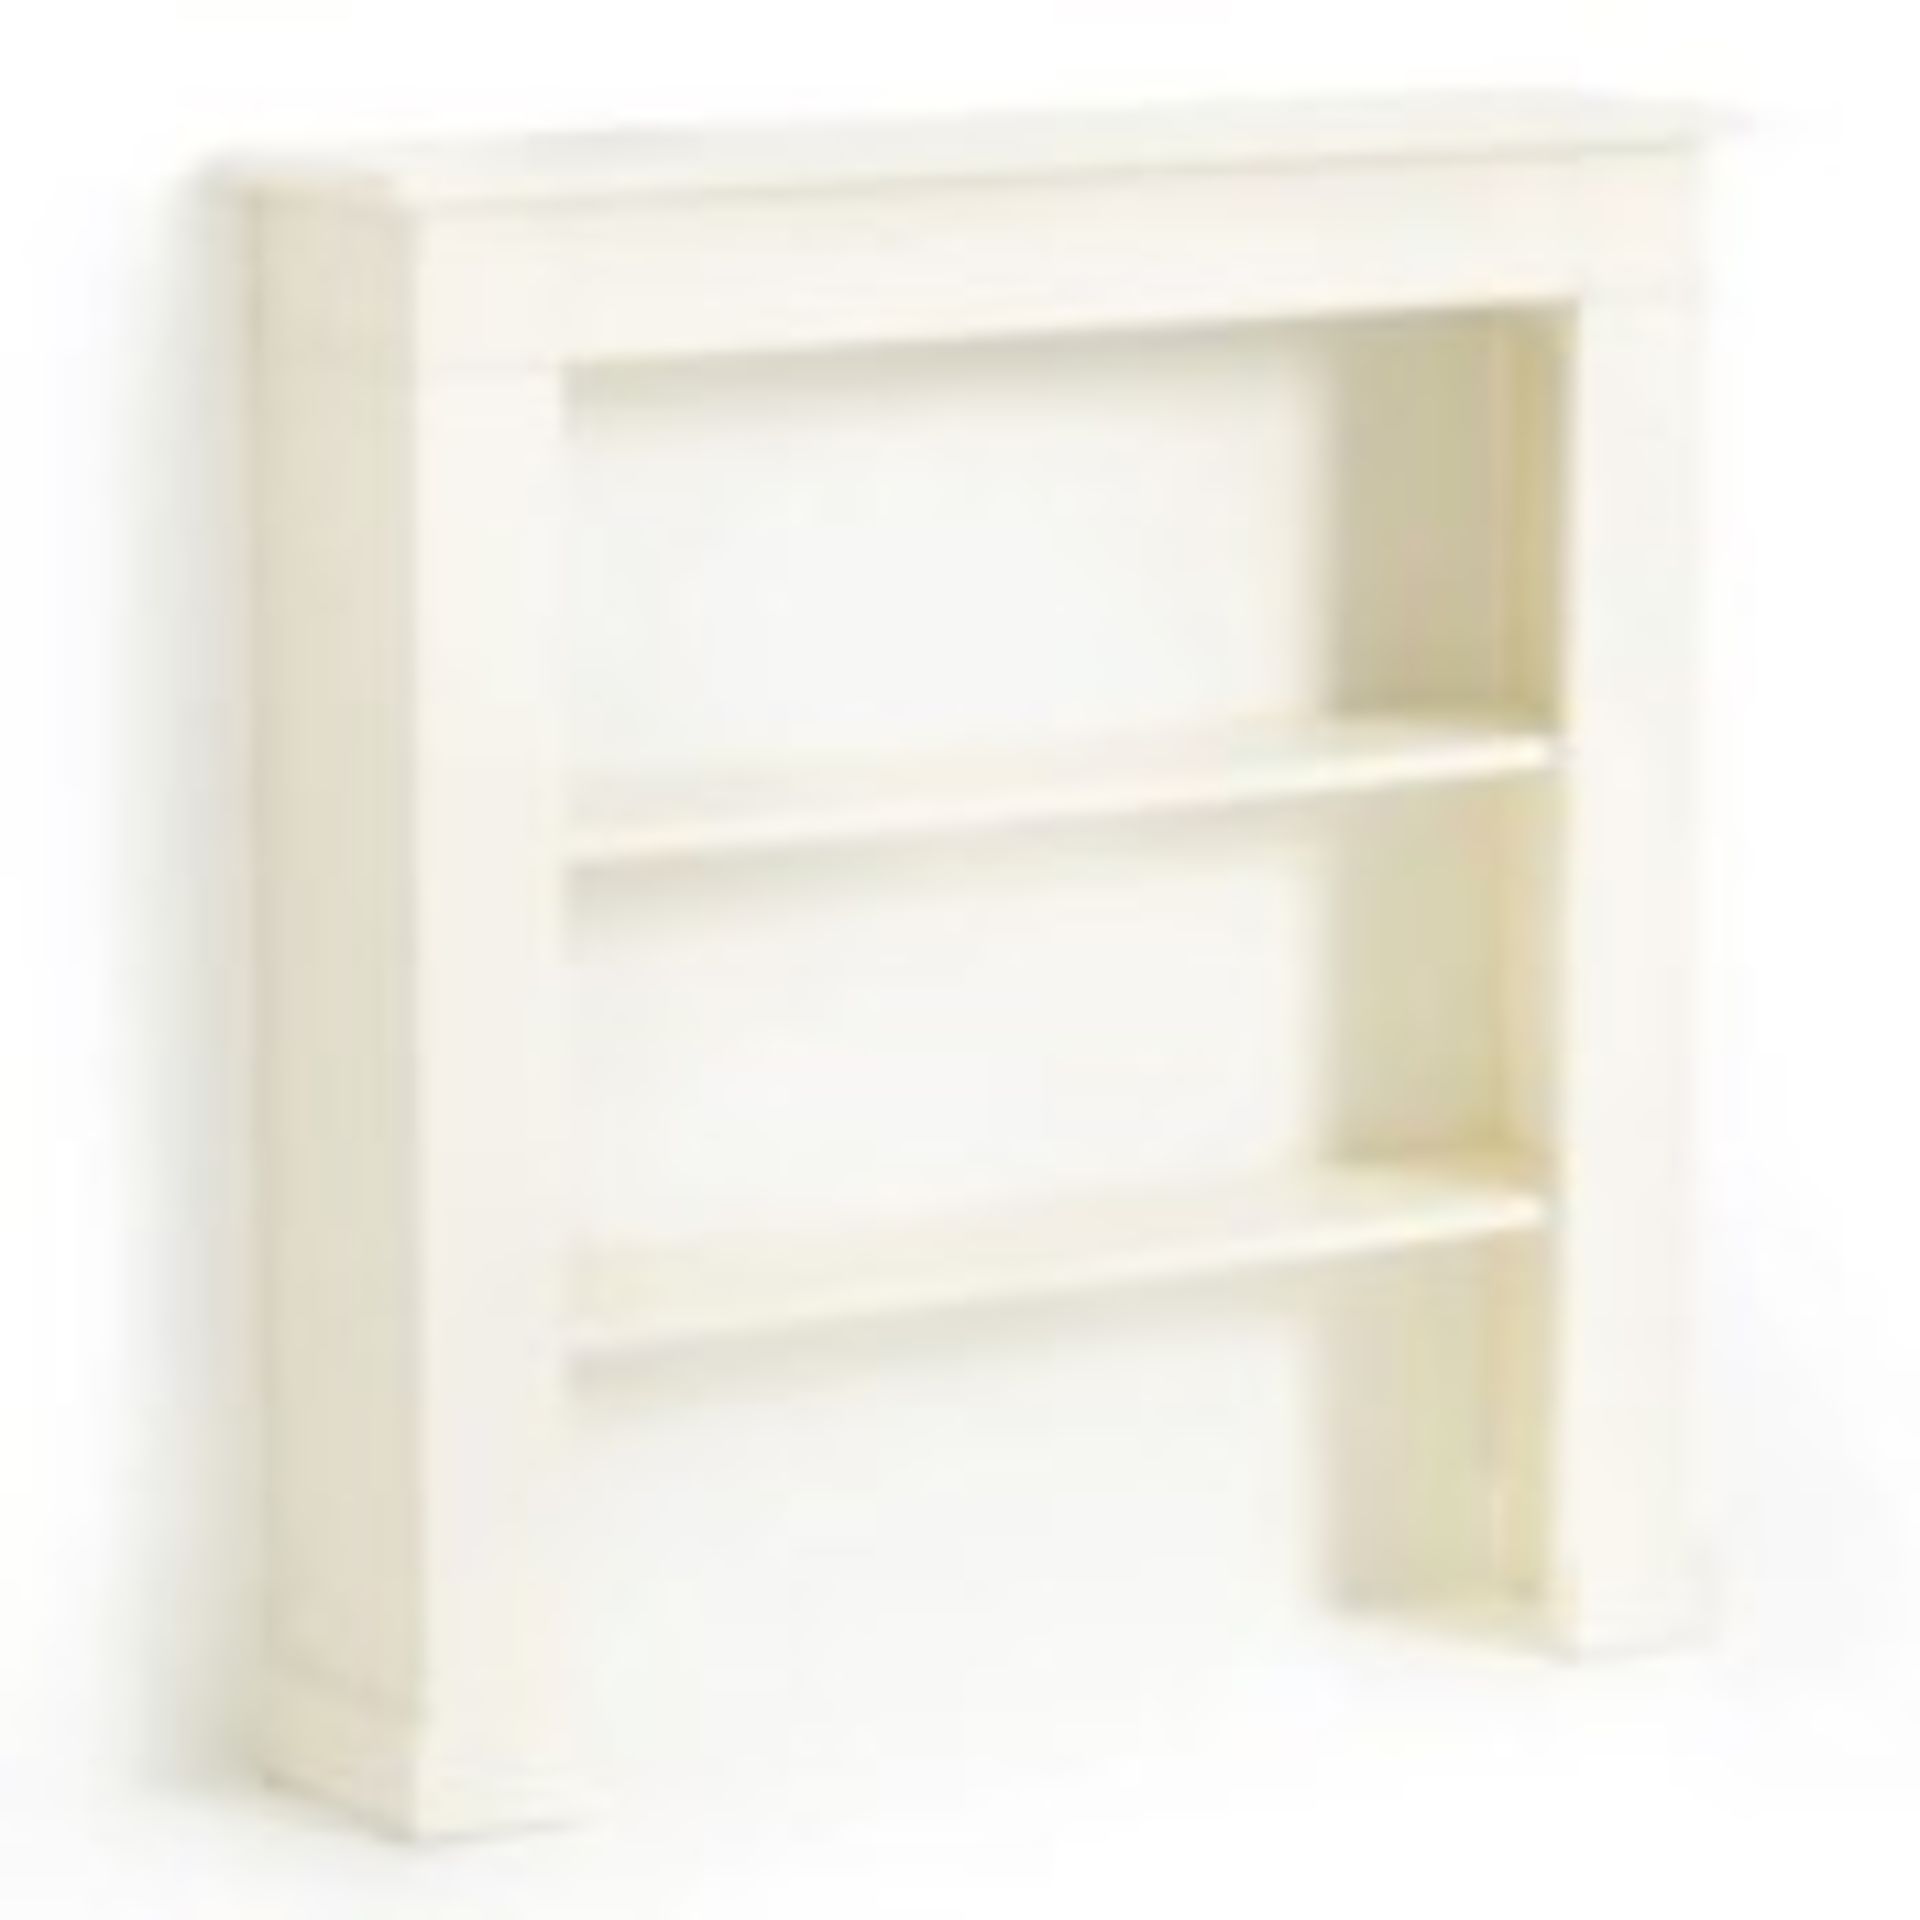 1 GRADE B BOXED DESIGNER SCOTTY DECORATIVE FIREPLACE SURROUND IN WHITE / RRP £120.00 (PUBLIC VIEWING